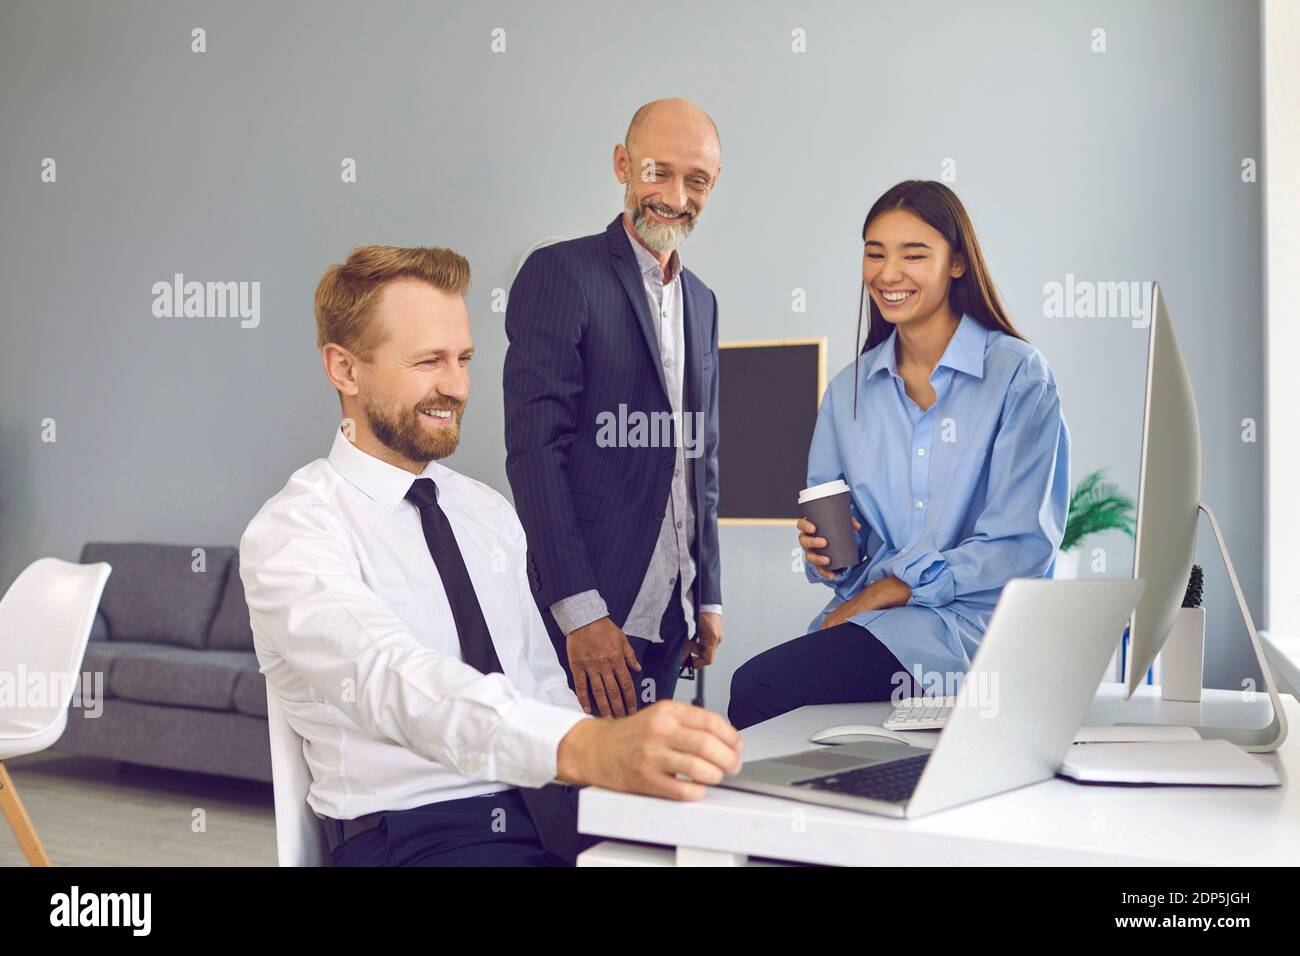 Employees discuss work moments in front of a laptop in a friendly atmosphere smiling and laughing. Stock Photo